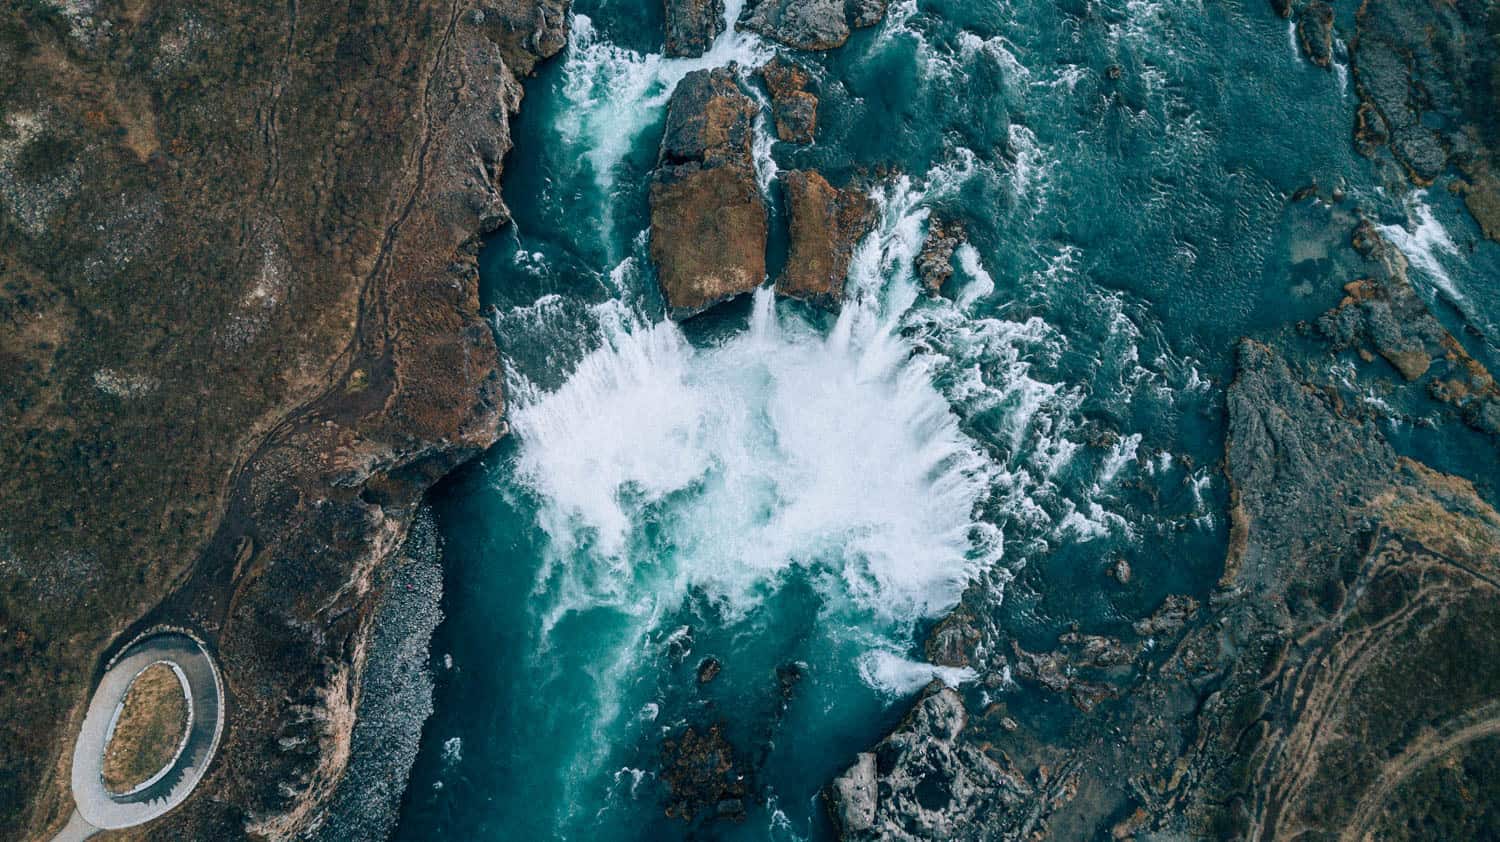 Godafoss from a drone